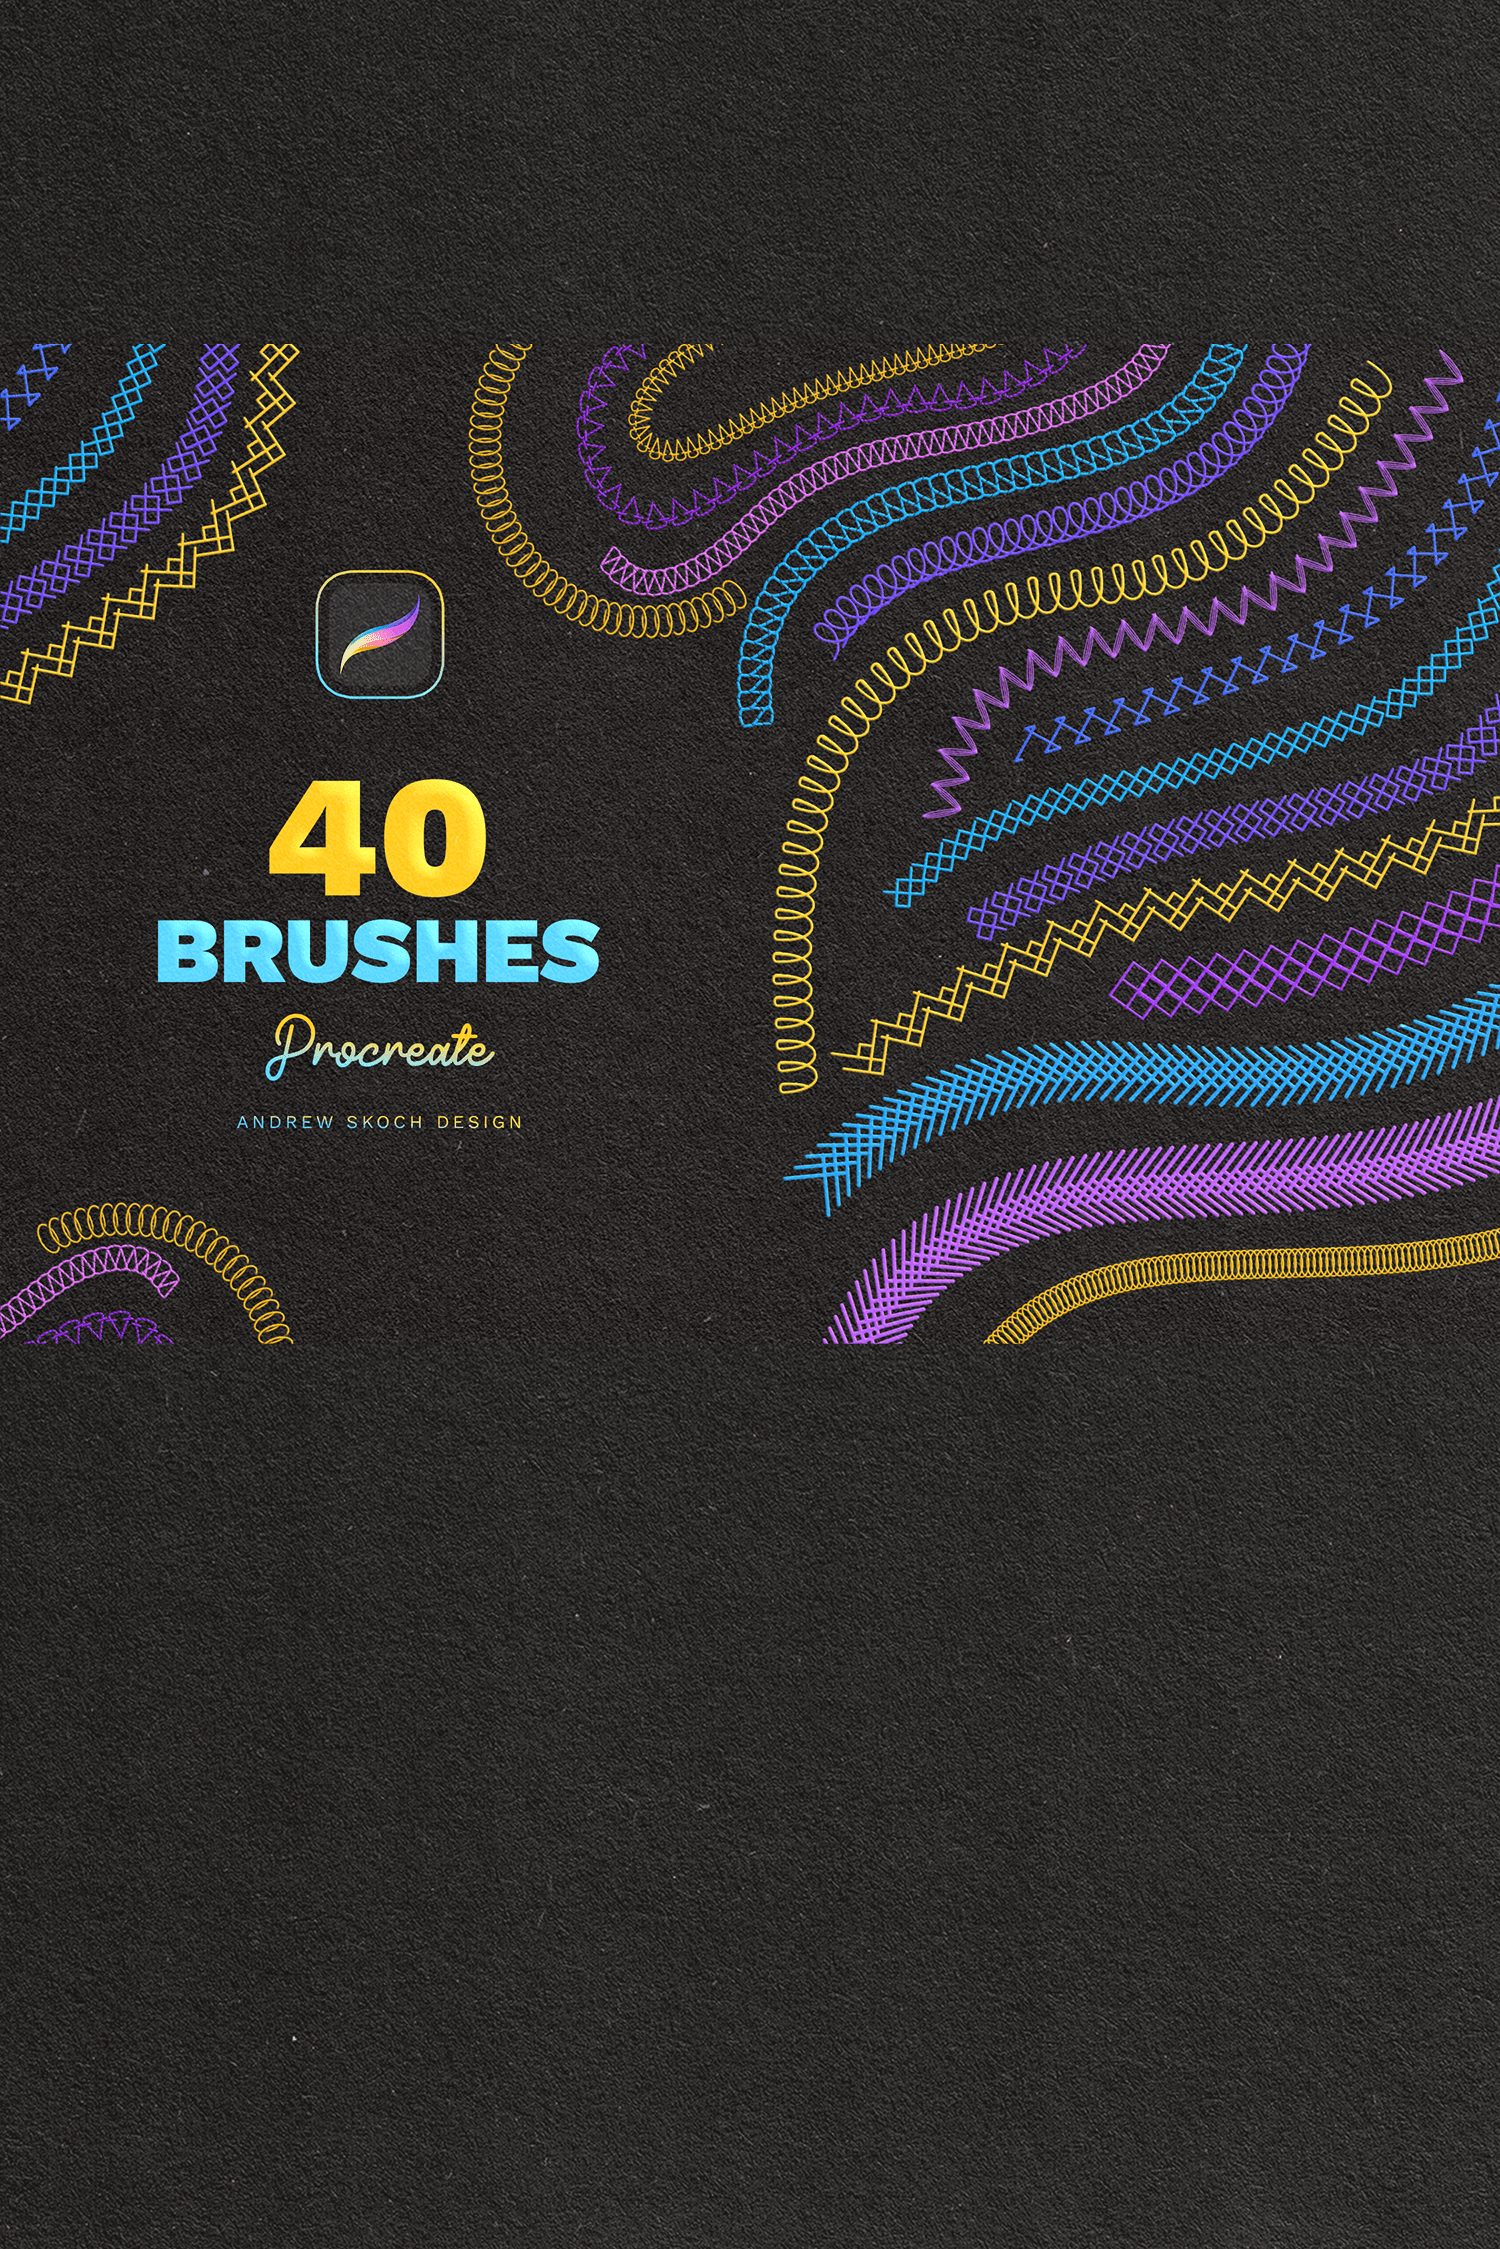 Embroidery Stitches Brushes By Andrew Skoch